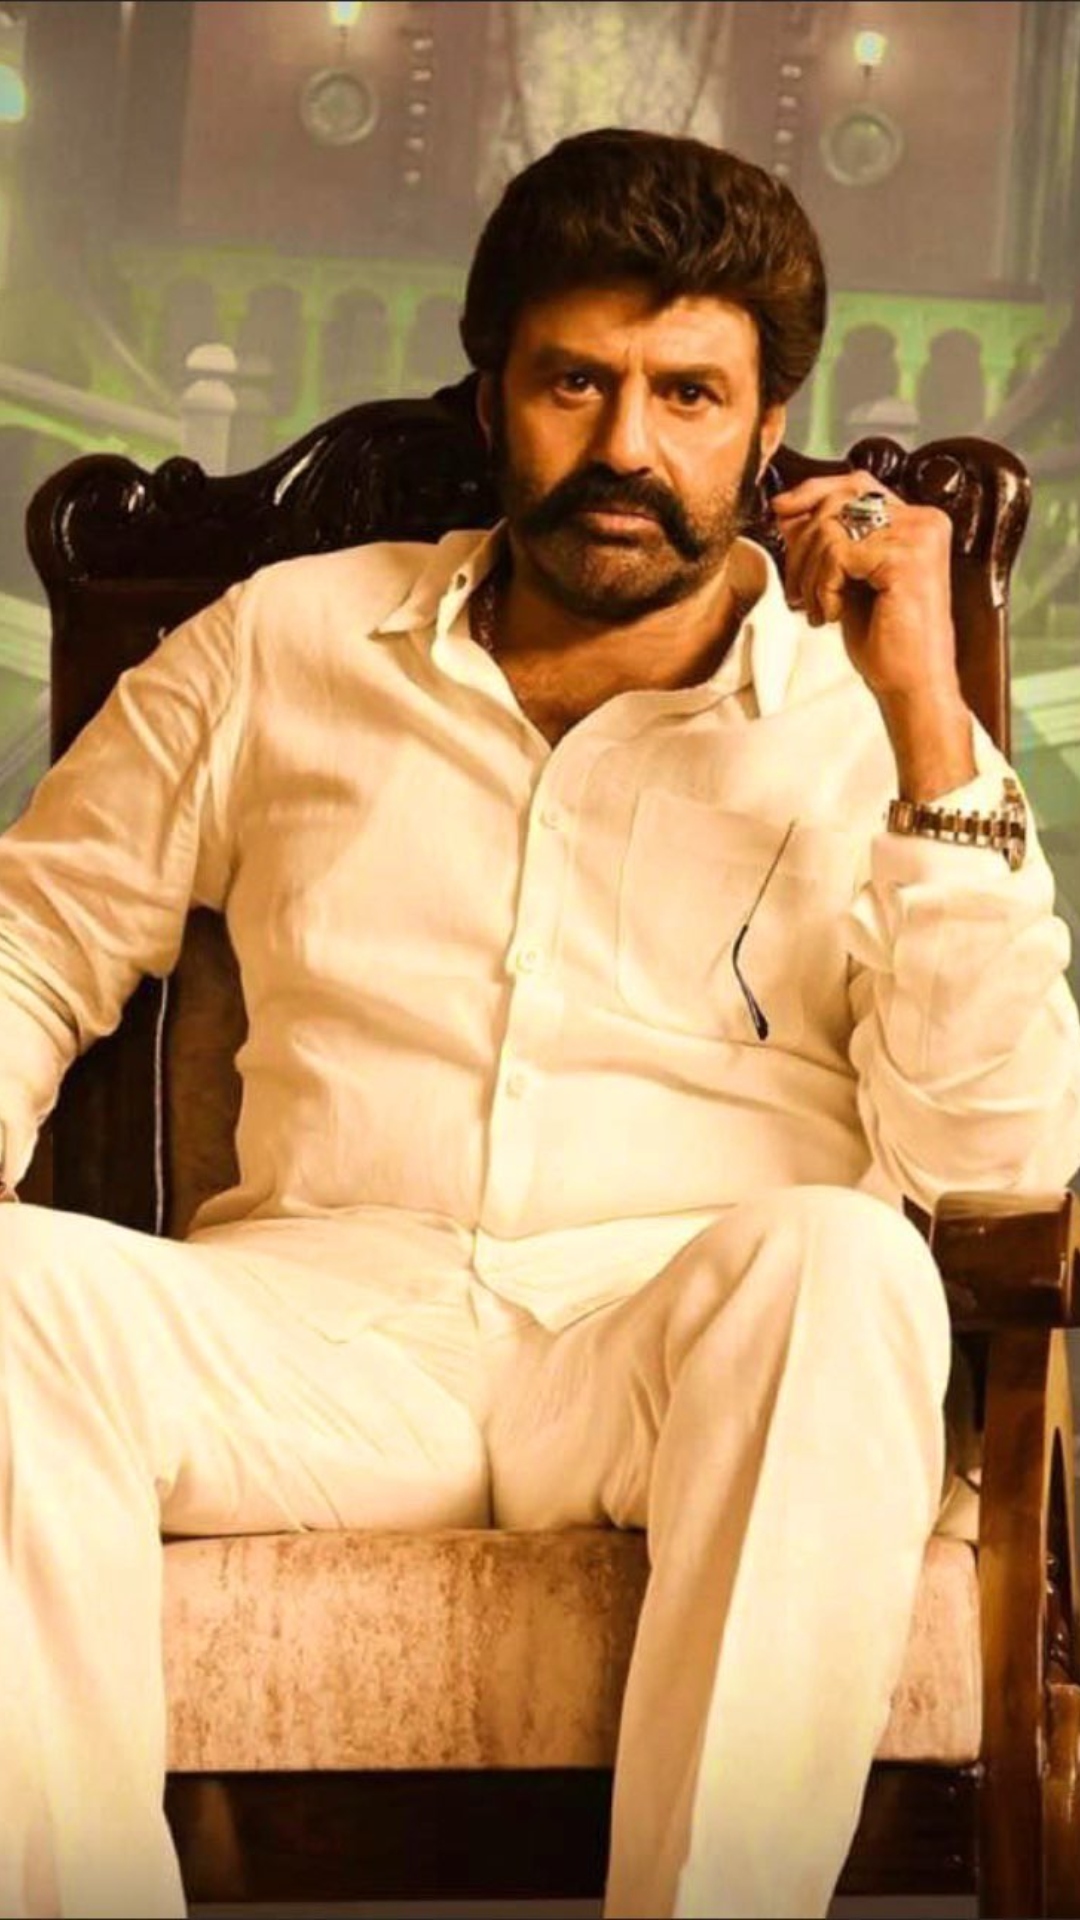 Nandamuri Balakrishna is back on the big screen with his most-awaited movie of the year, Veera Simha Reddy. See his never-seen-before avatar from the film.